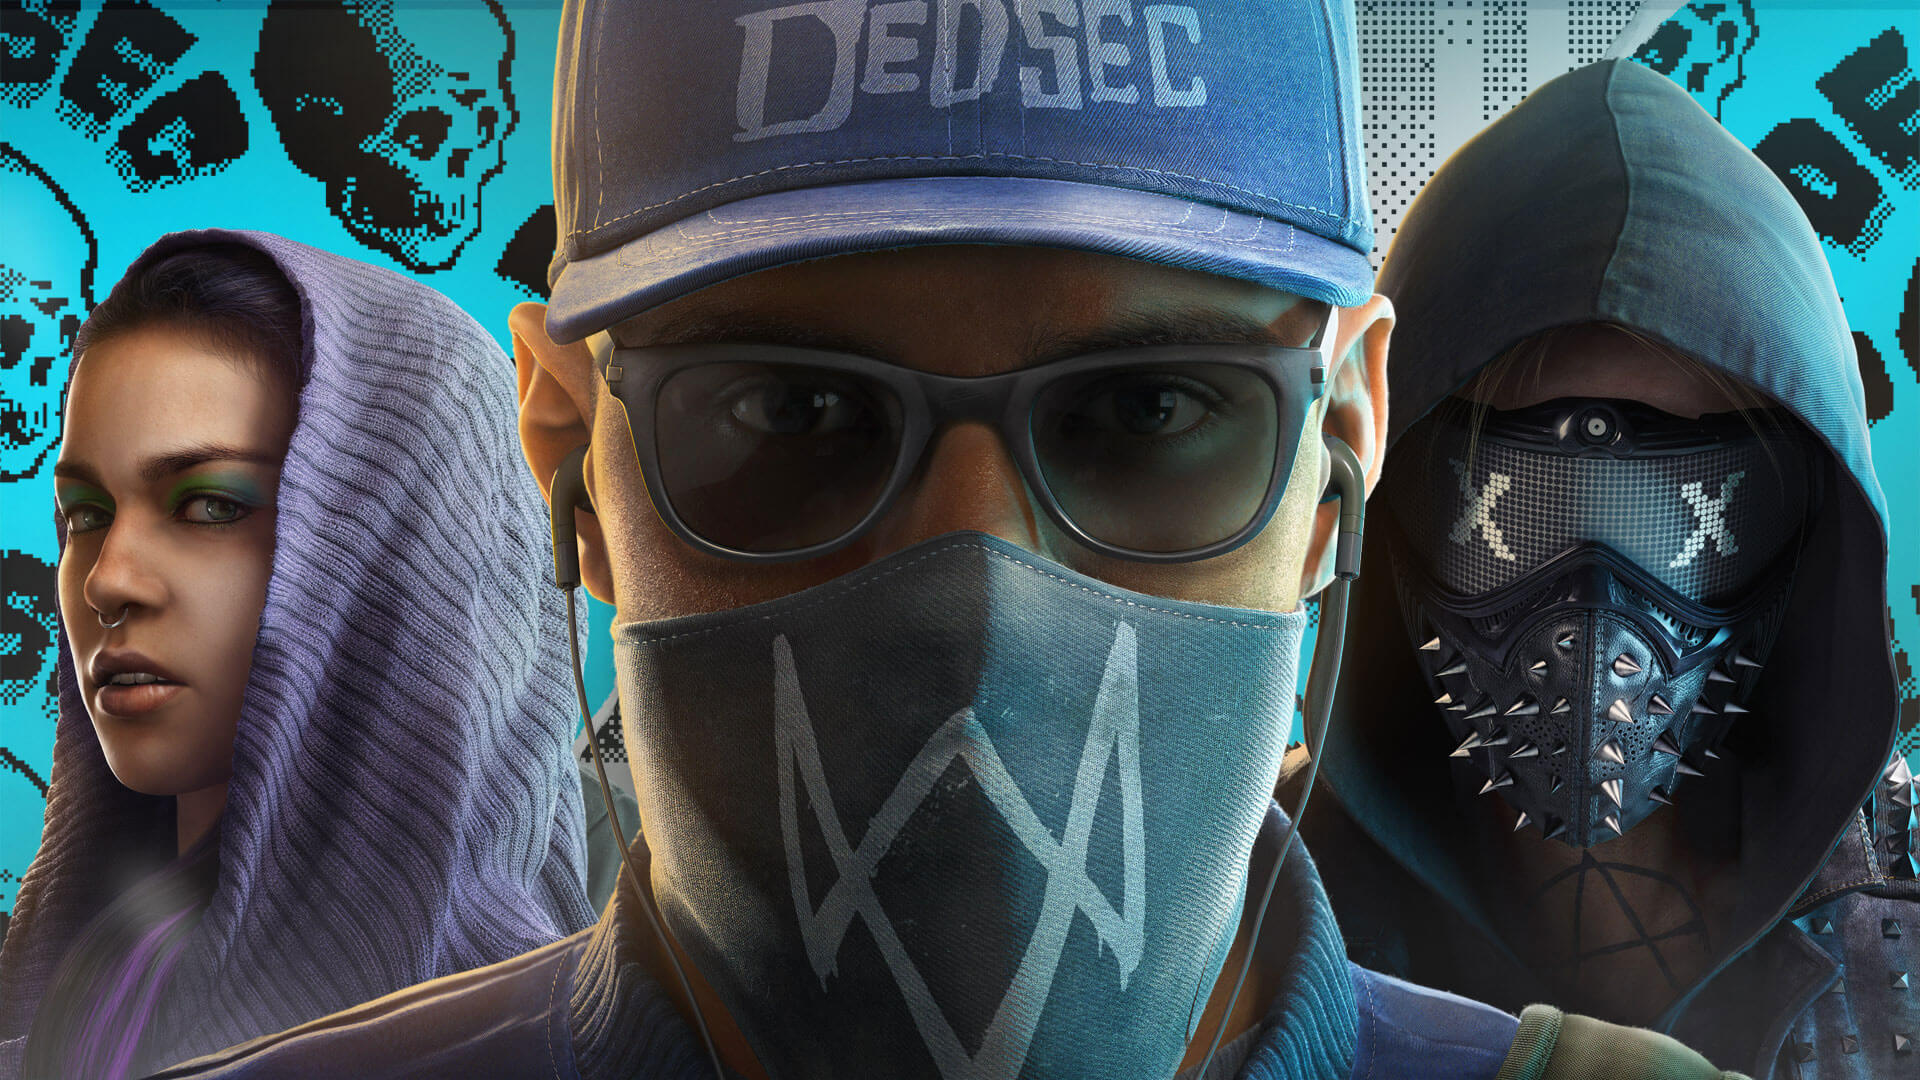 watch_dogs_2_banner